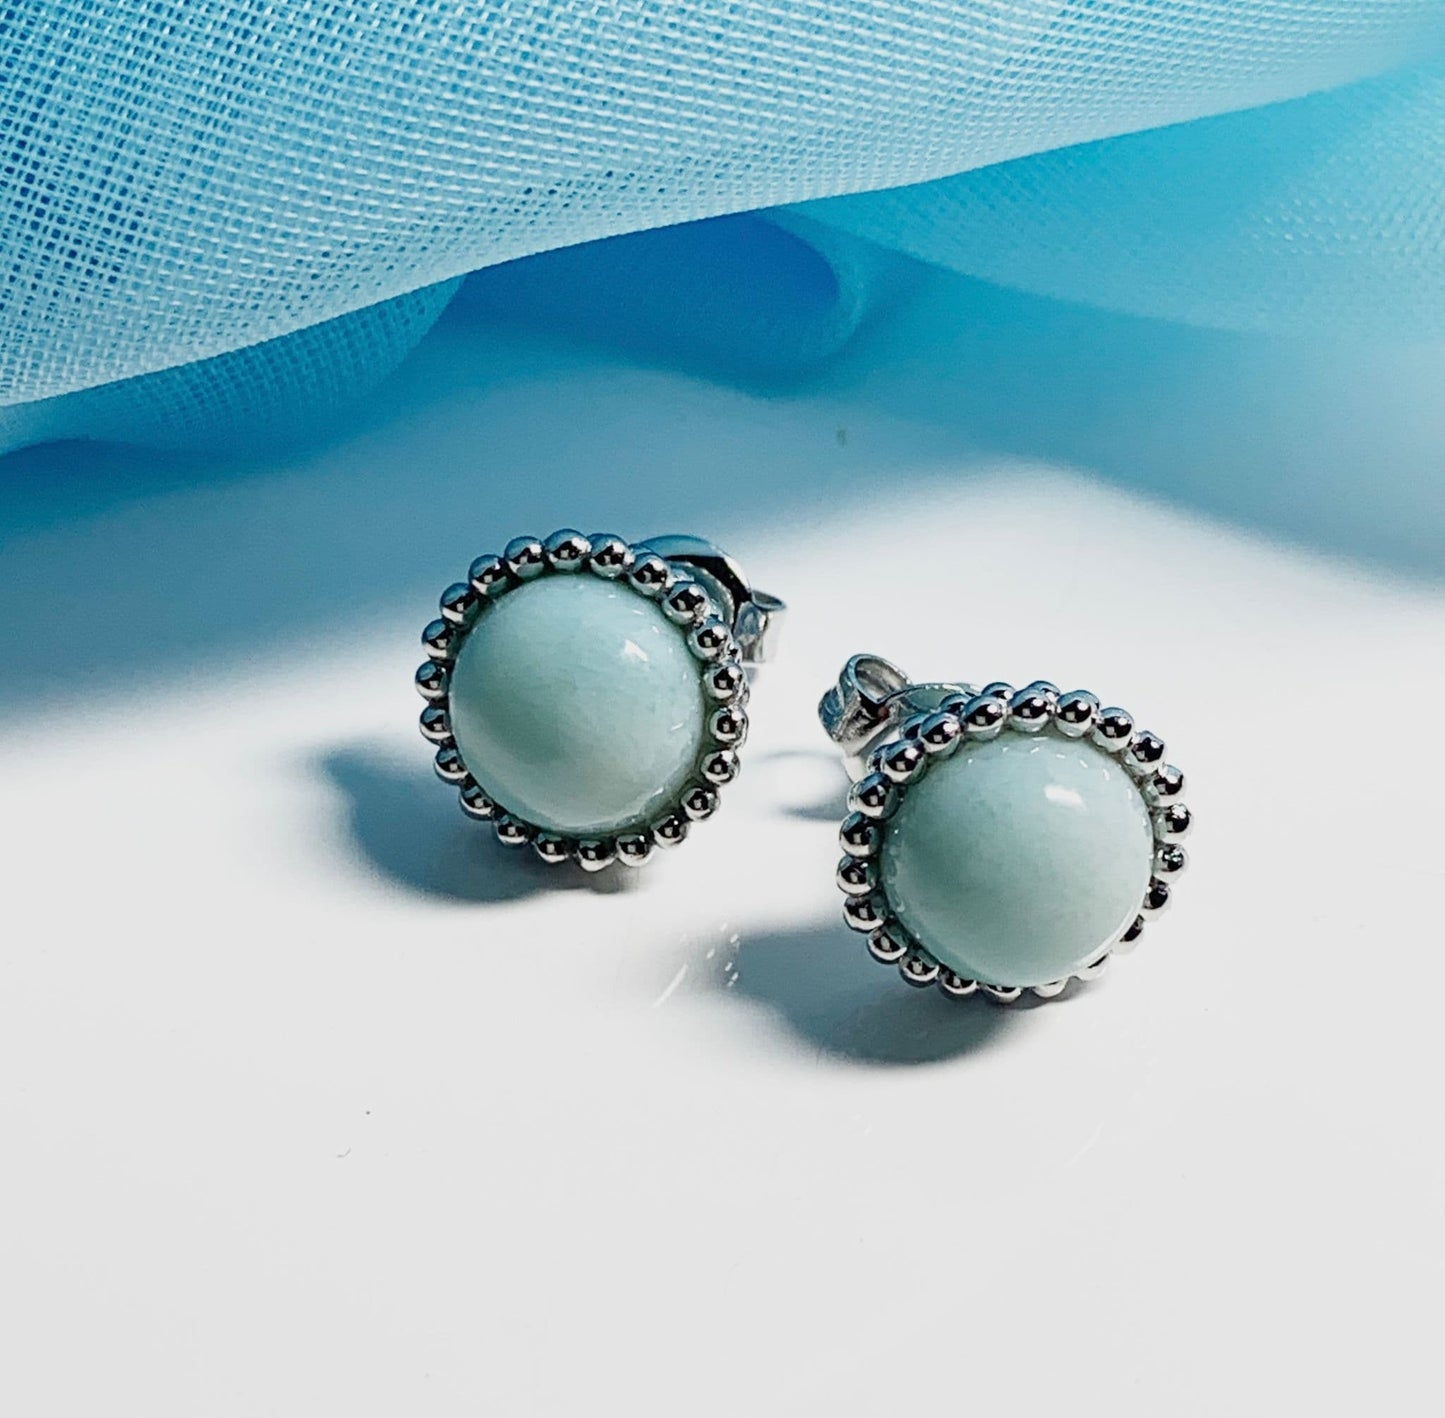 Larimar Round Sterling Silver Patterned Bobbled Stud Earrings